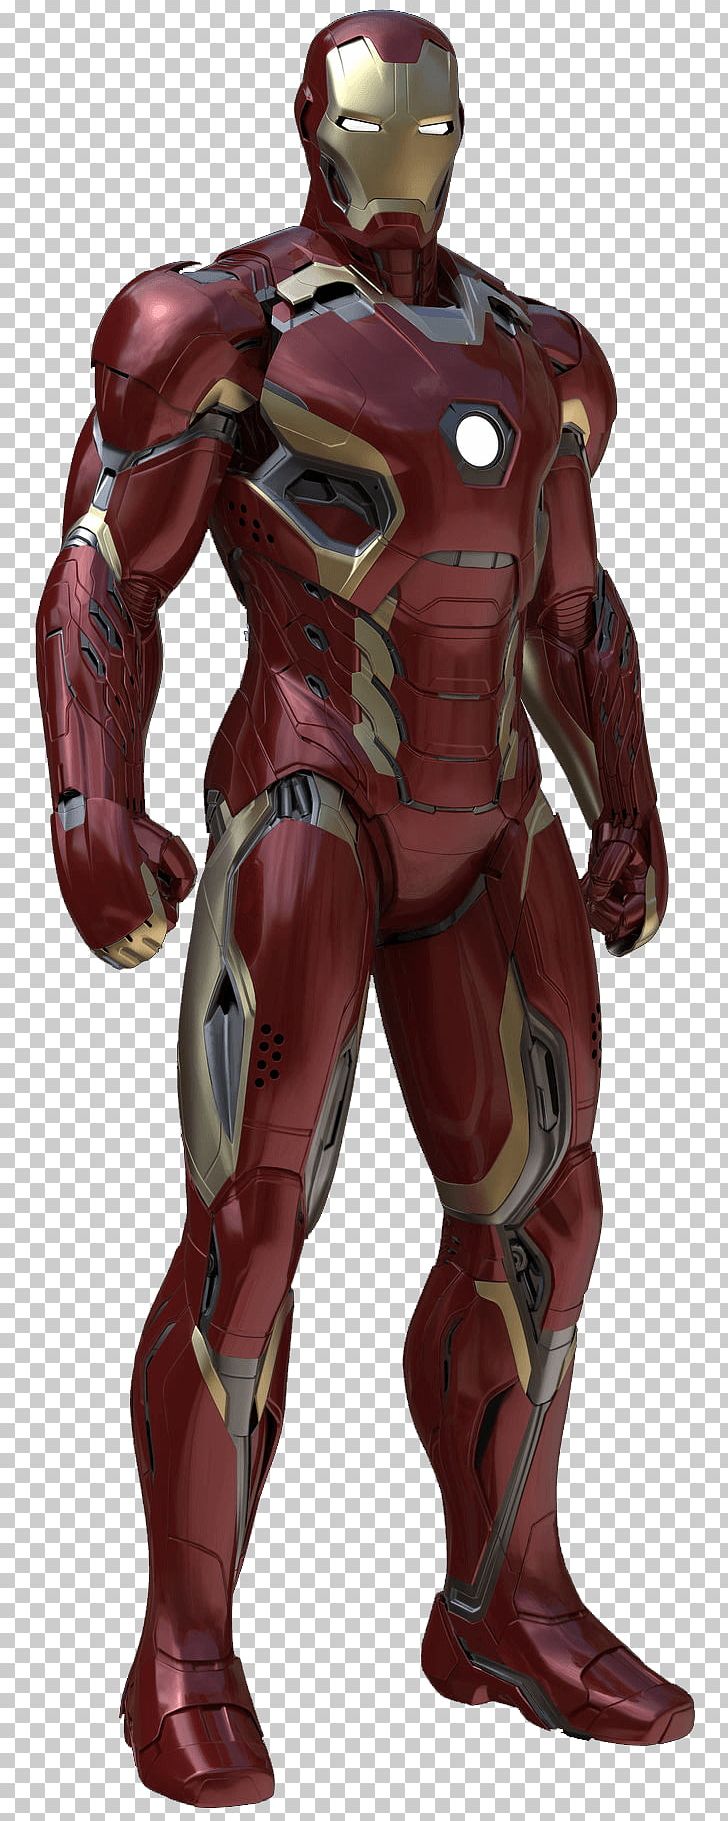 Iron Man's Armor Edwin Jarvis Marvel Cinematic Universe Film PNG, Clipart, Action, Armour, Avengers Age Of Ultron, Avengers Infinity War, Captain America Civil War Free PNG Download